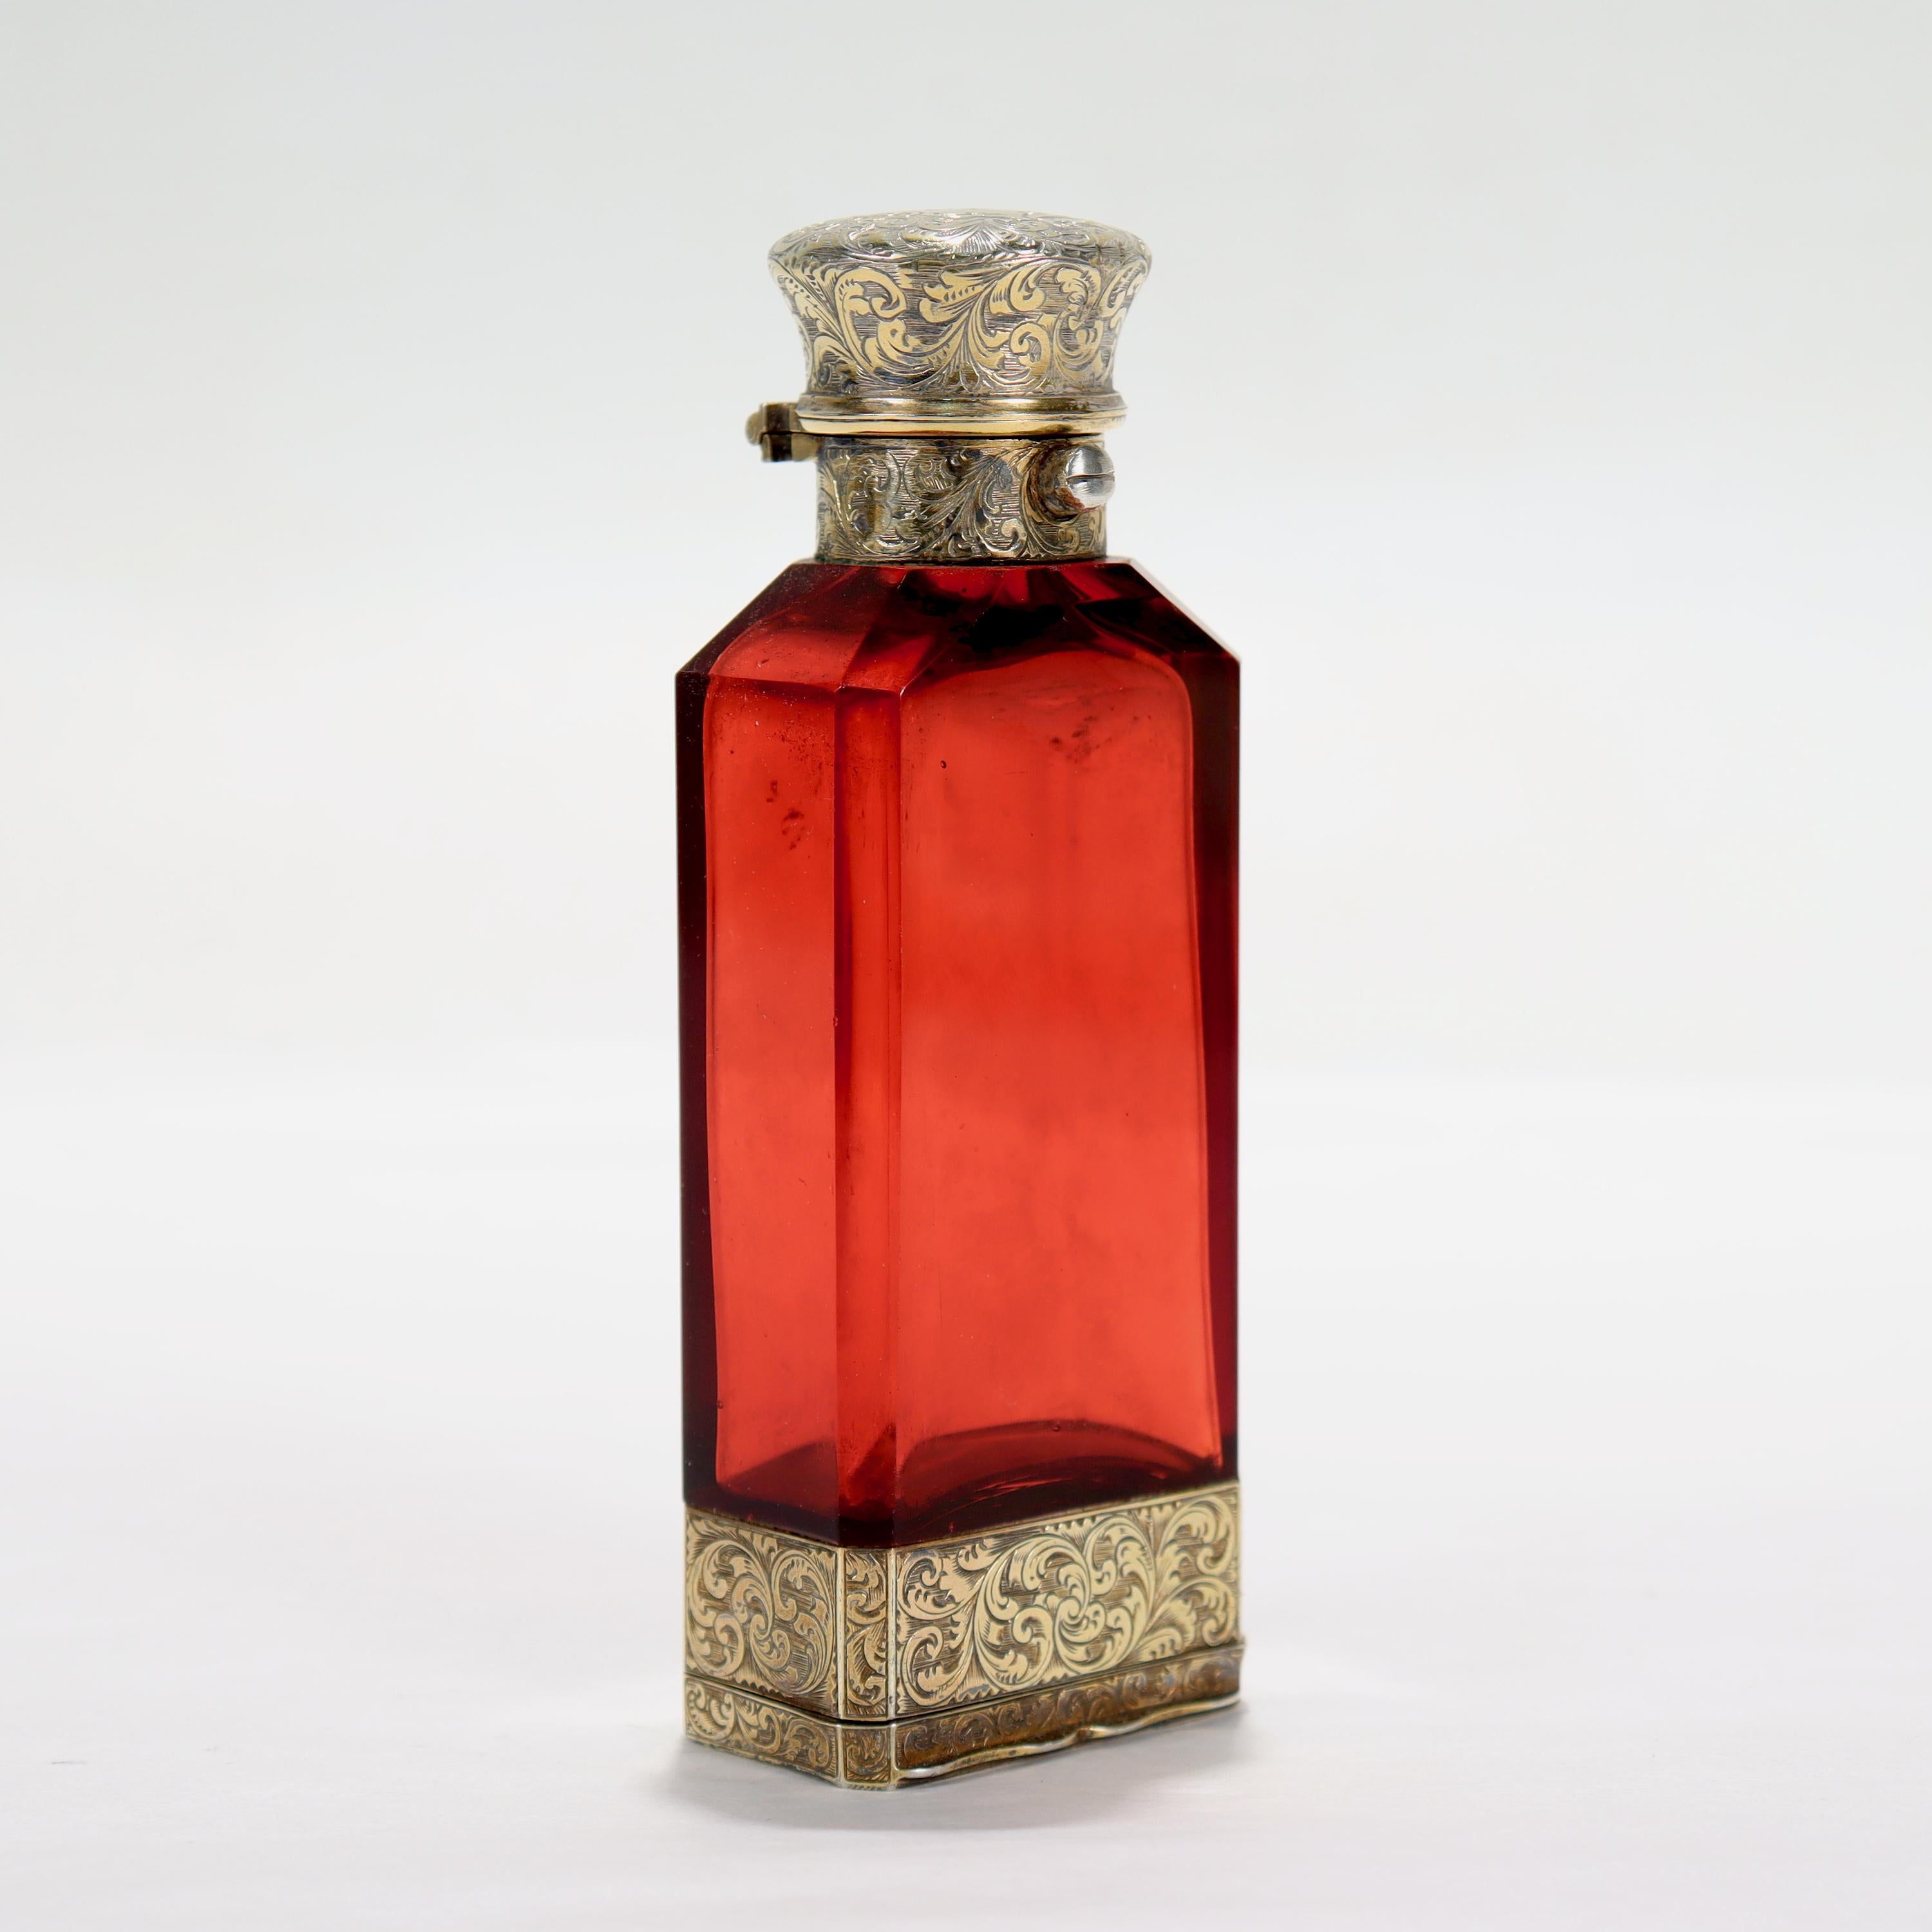 A fine antique Victorian glass & sterling silver perfume bottle with an integral vinaigrette.

By Sampson Mordan

With a faceted ruby glass bottle mounted in etched gilt silver mounts with an integral vinaigrette to the base. 

Simply a great